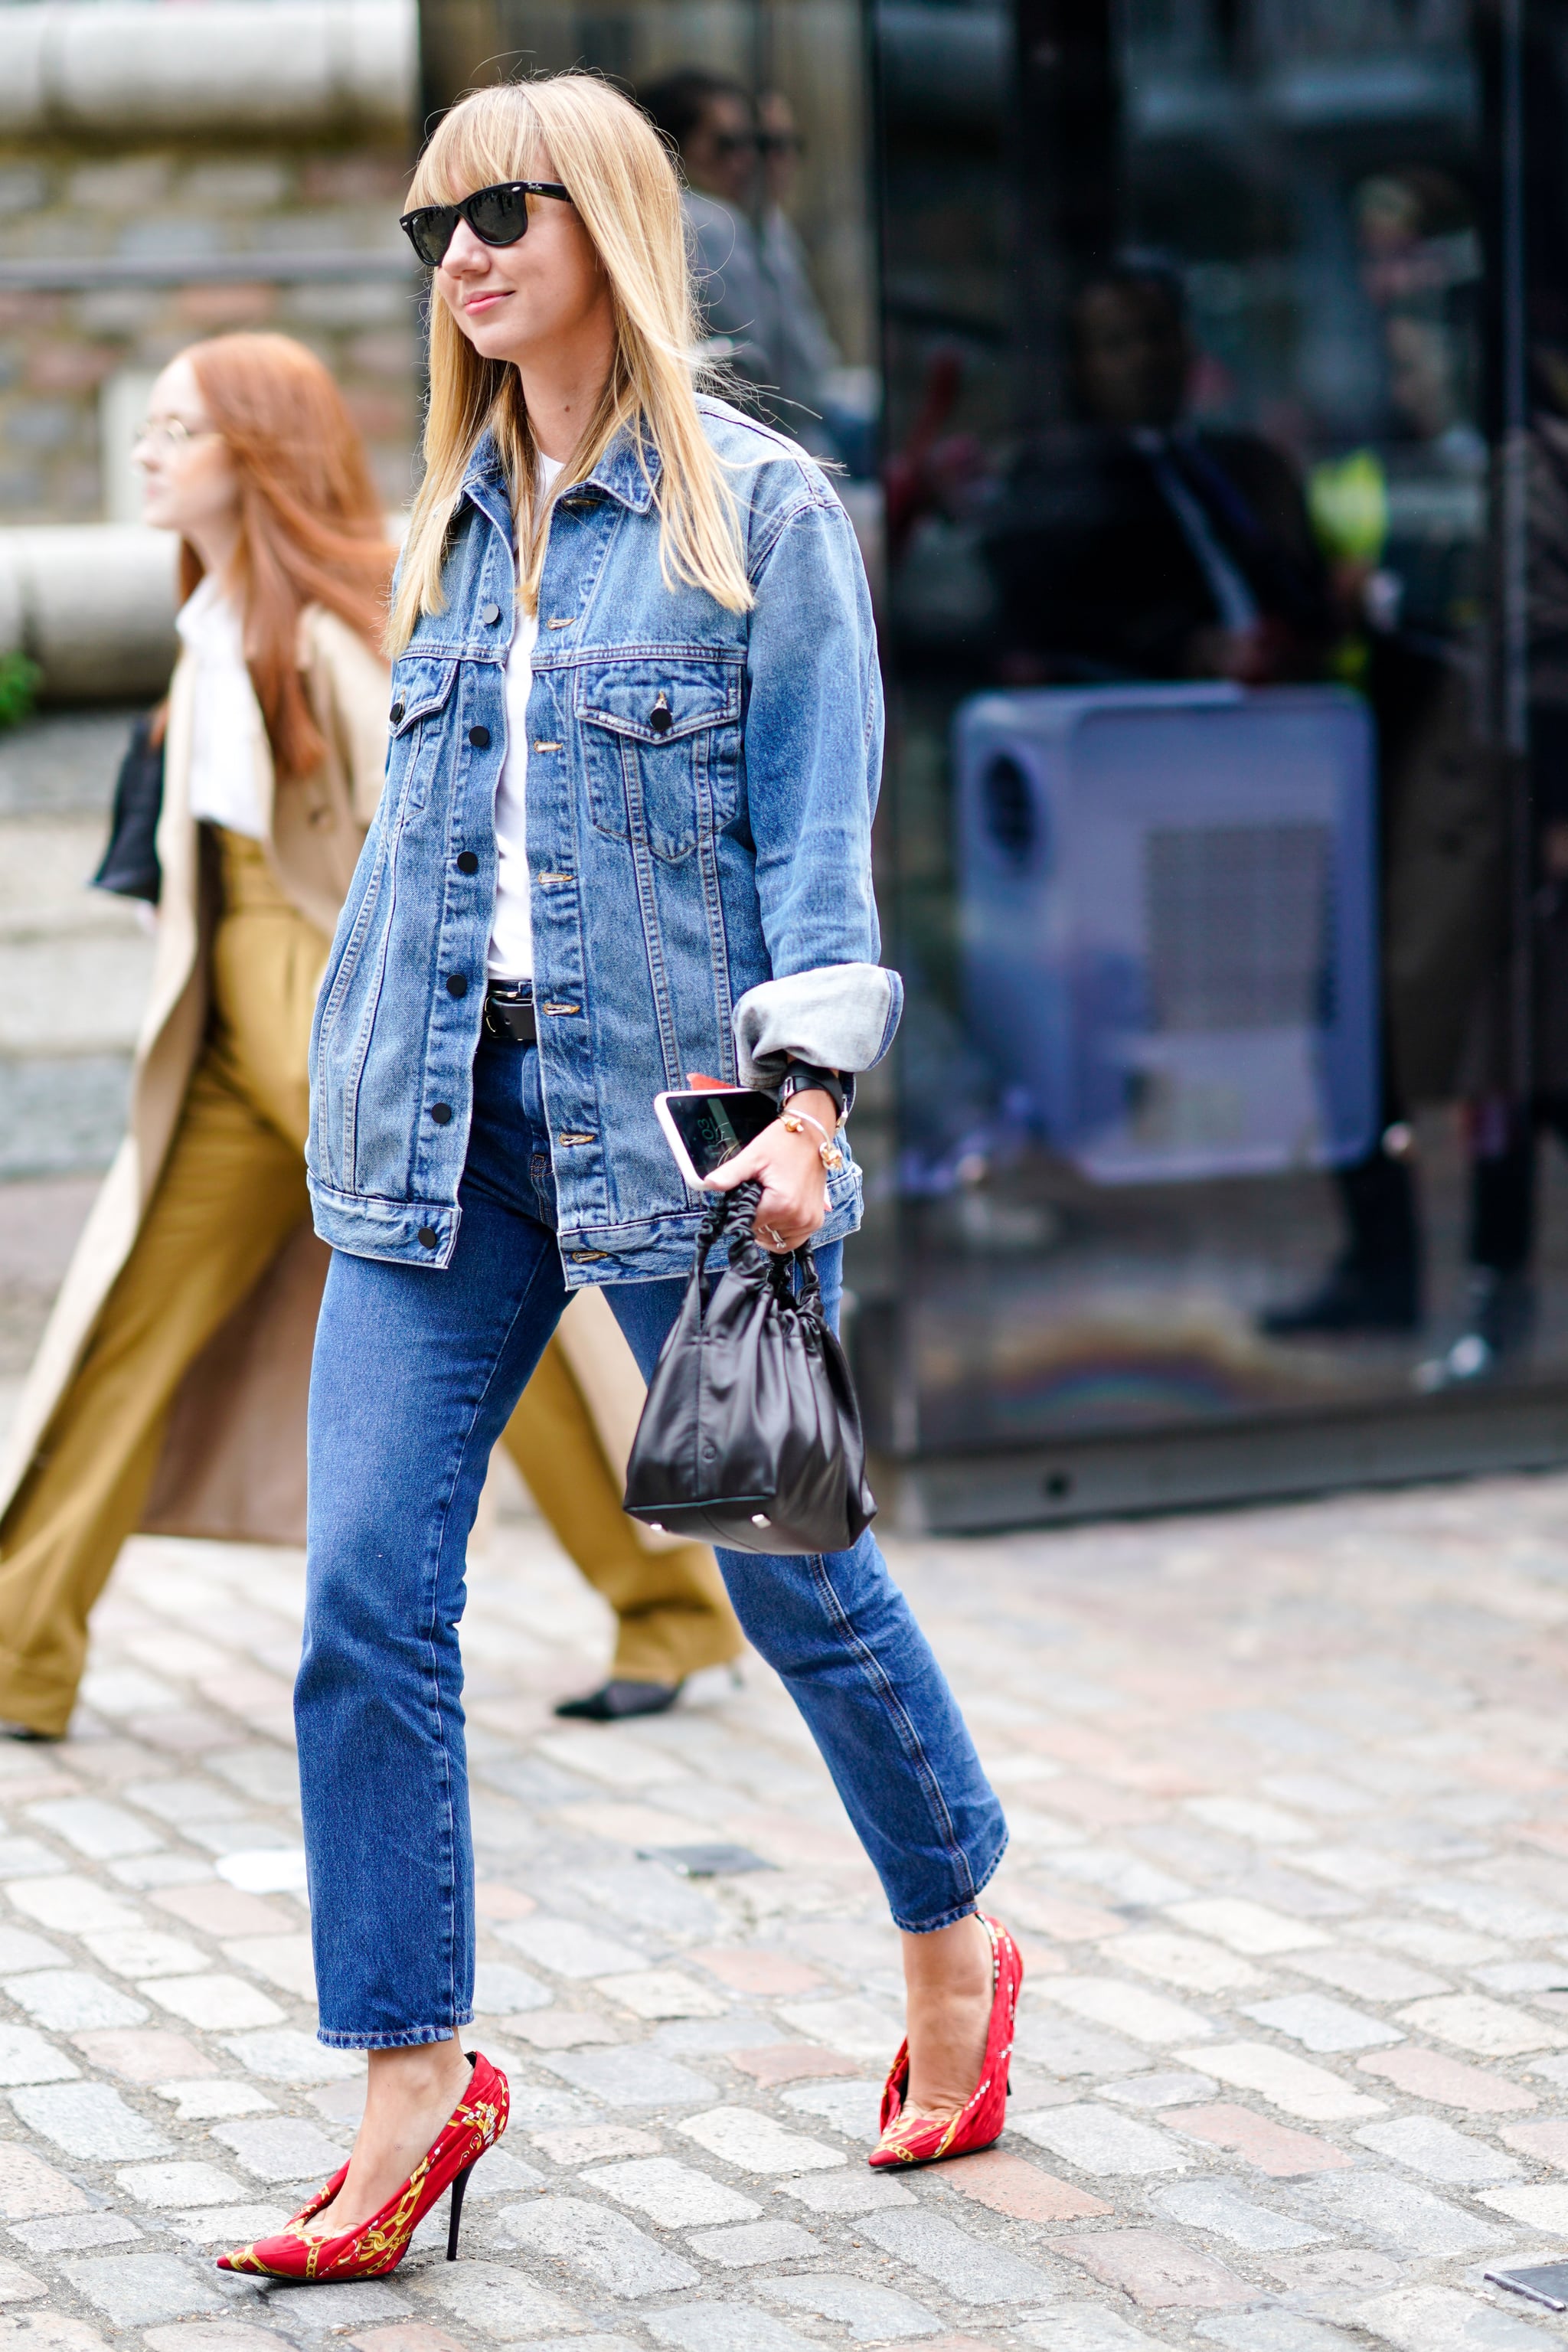 Embellished Denim Jacket & Sparkly Heels! | Cosmochics | Best Blogs for  Fashion, Beauty, Lifestyle and Parenting